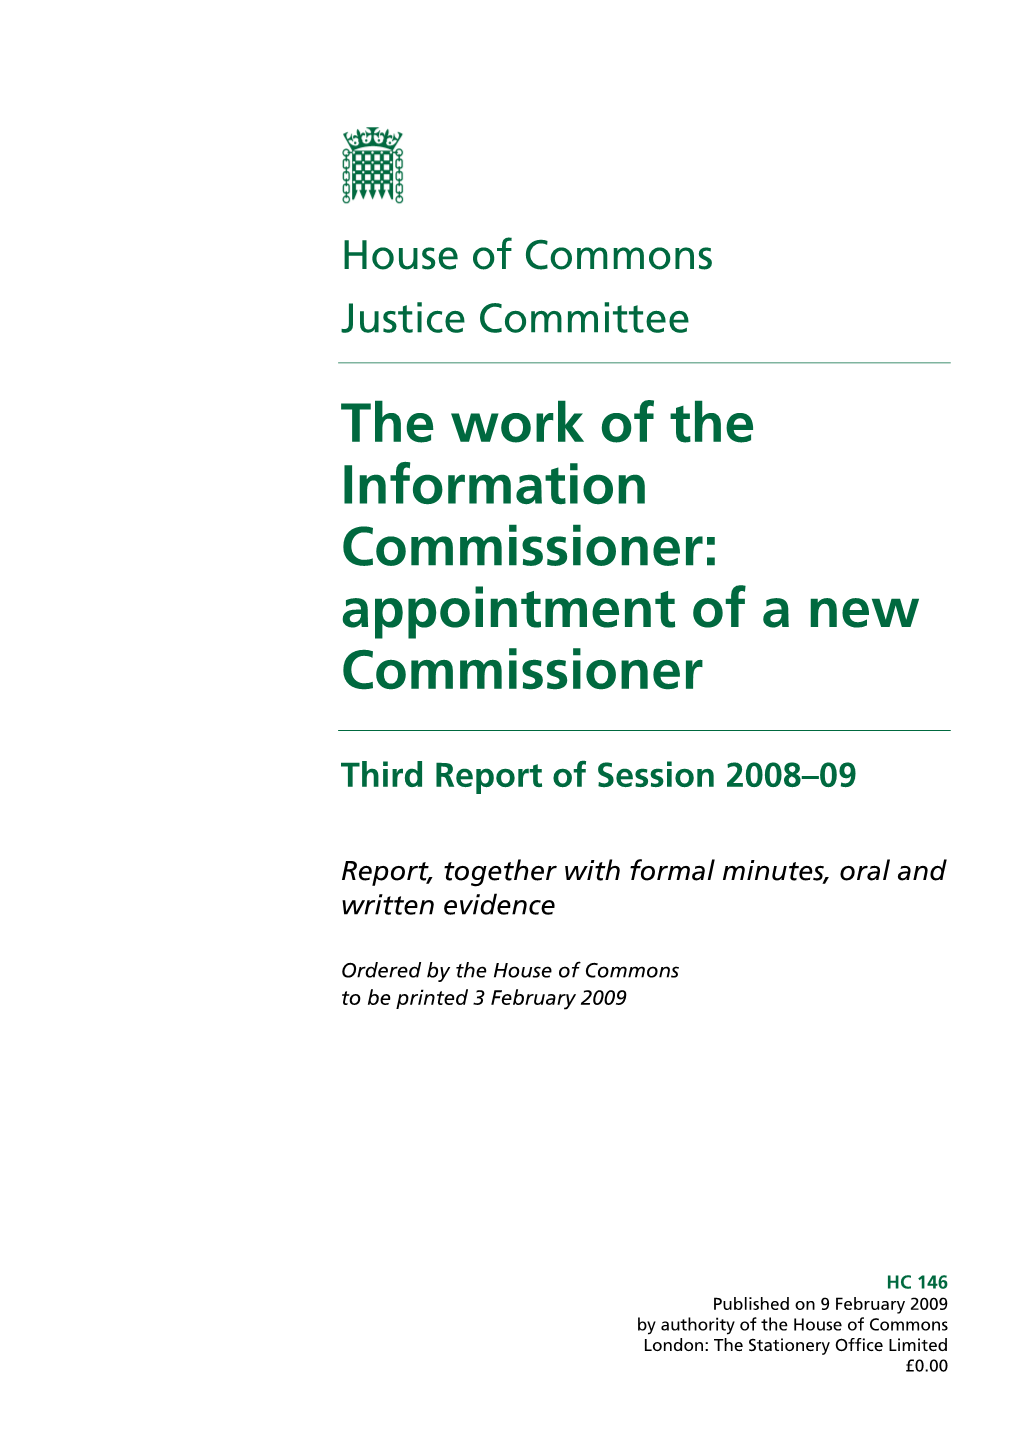 The Work of the Information Commissioner: Appointment of a New Commissioner